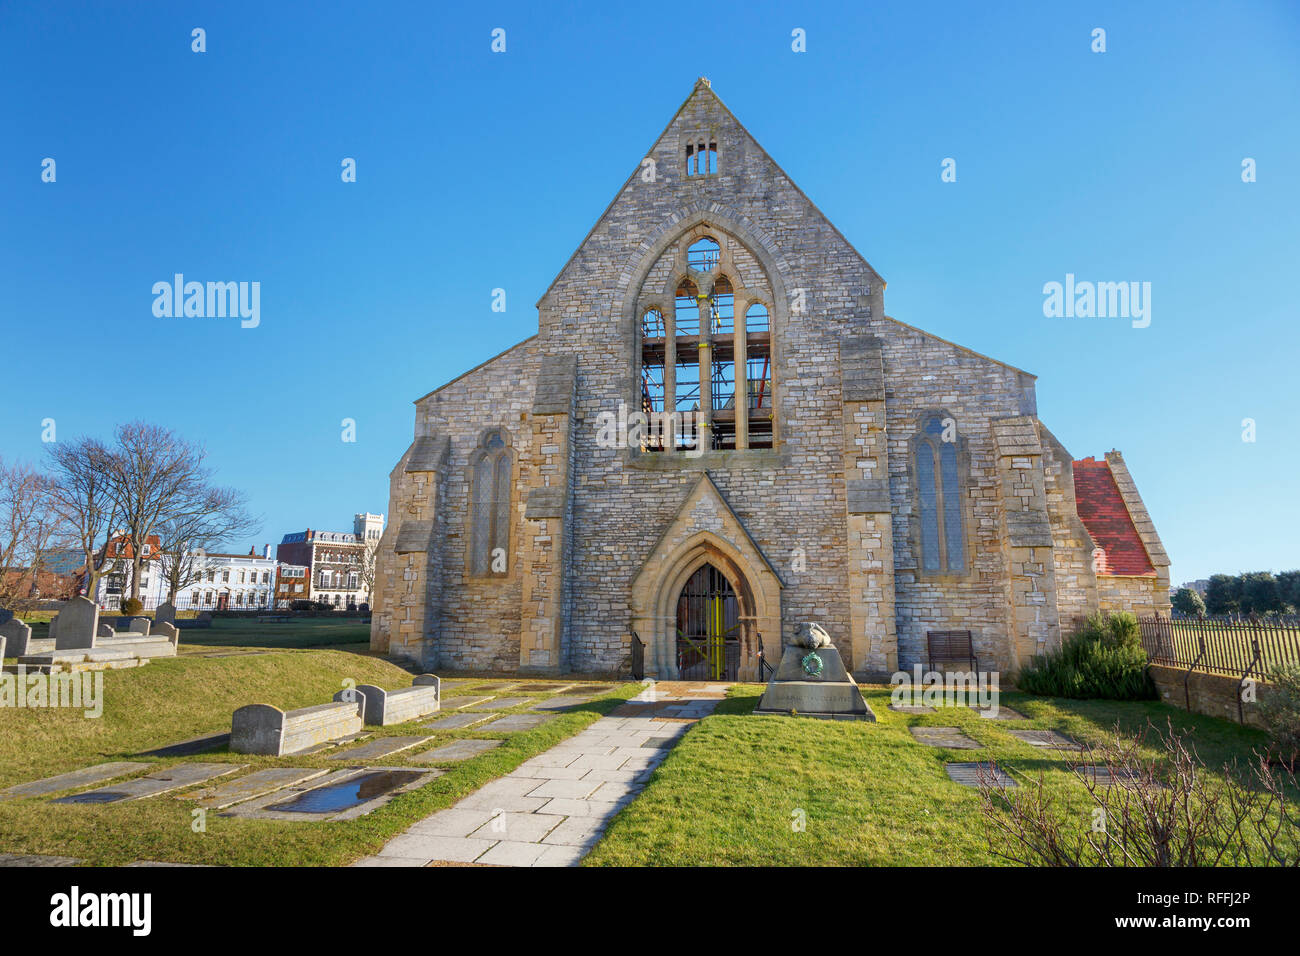 Front facade of the ruins of the Royal Garrison Church in Old Portsmouth, UK, bombed a fire raid in 1941 in World War II Stock Photo